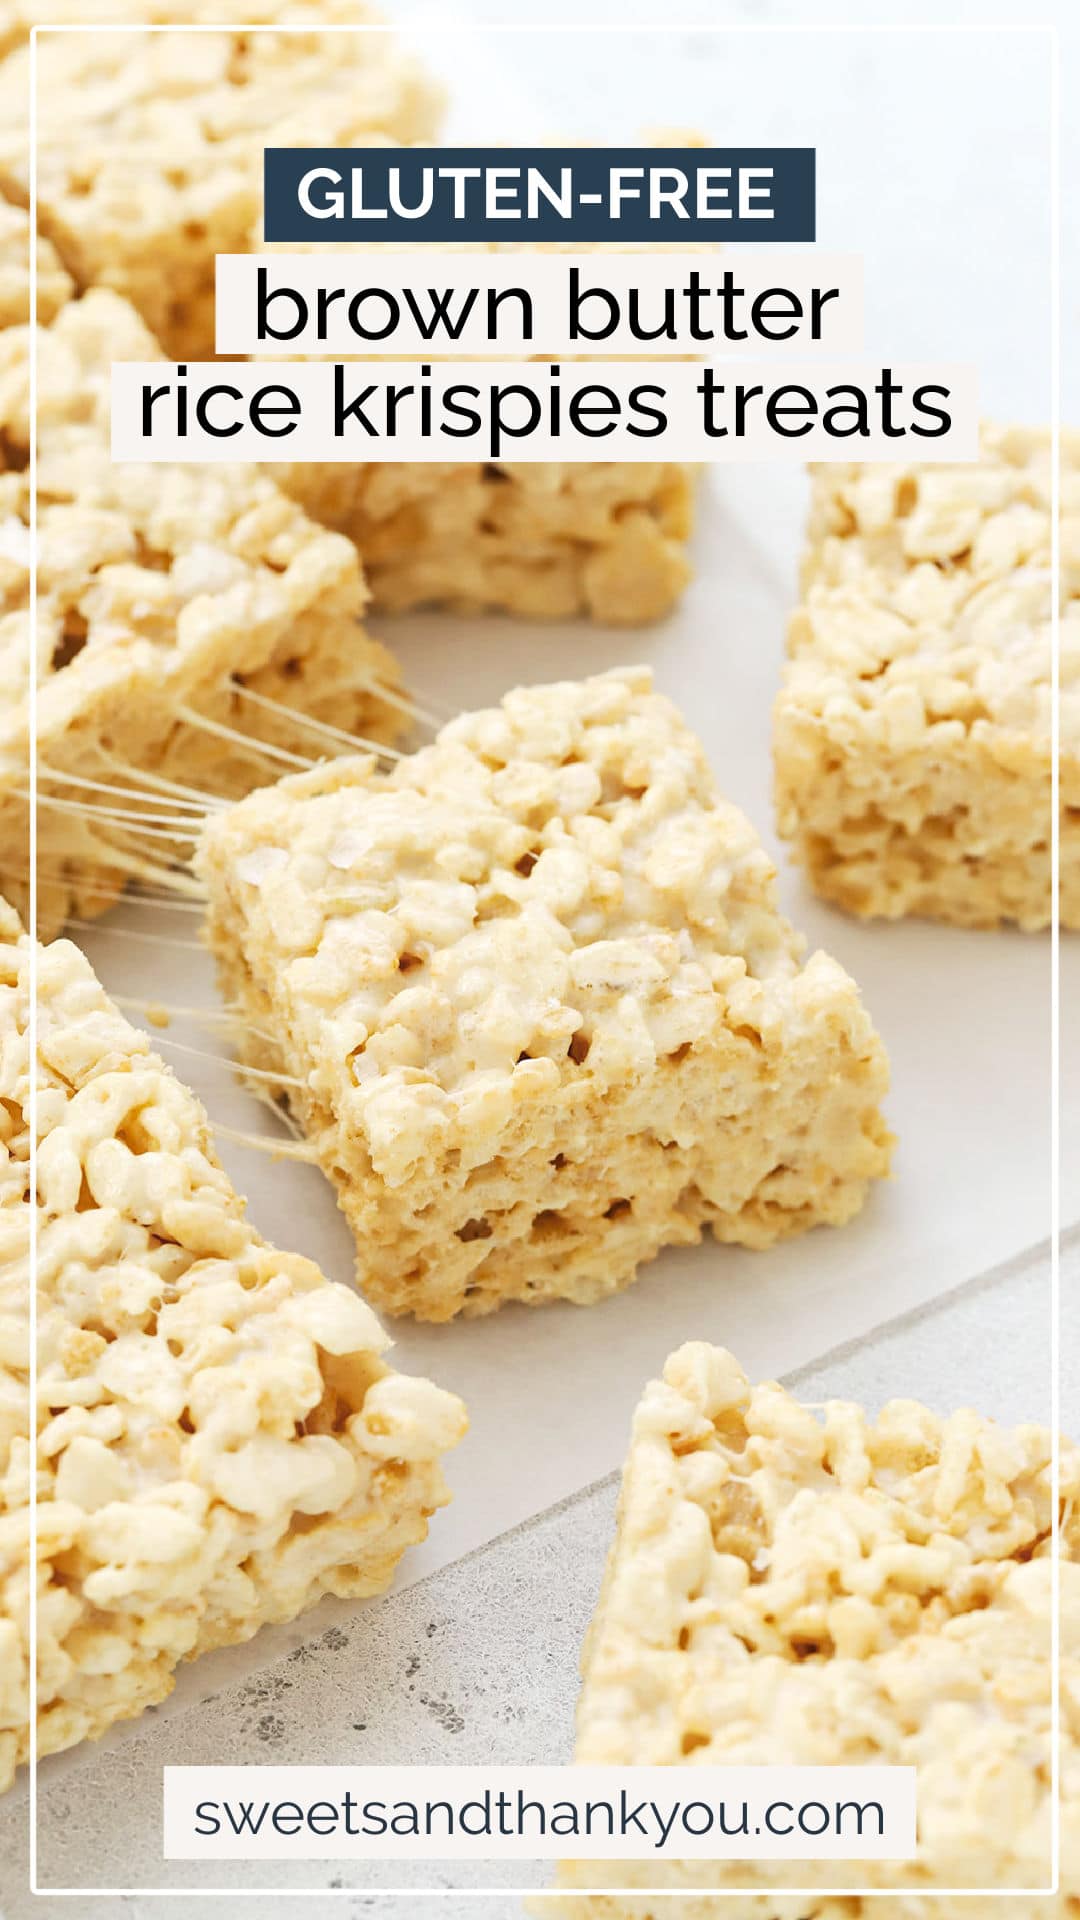 Gluten-Free Brown Butter Rice Krispies Treats - This gluten-free rice krispies treats recipe is a total revelation. Gooey, gorgeous, and finished with a few flecks of flaky seas salt, they're absolutely incredible! // browned butter rice krispies treats // gluten-free crisp rice treats // gluten-free no-bake dessert // best brown butter rice krispies treats // sea salt brown butter rice krispies treats // no-bake recipes